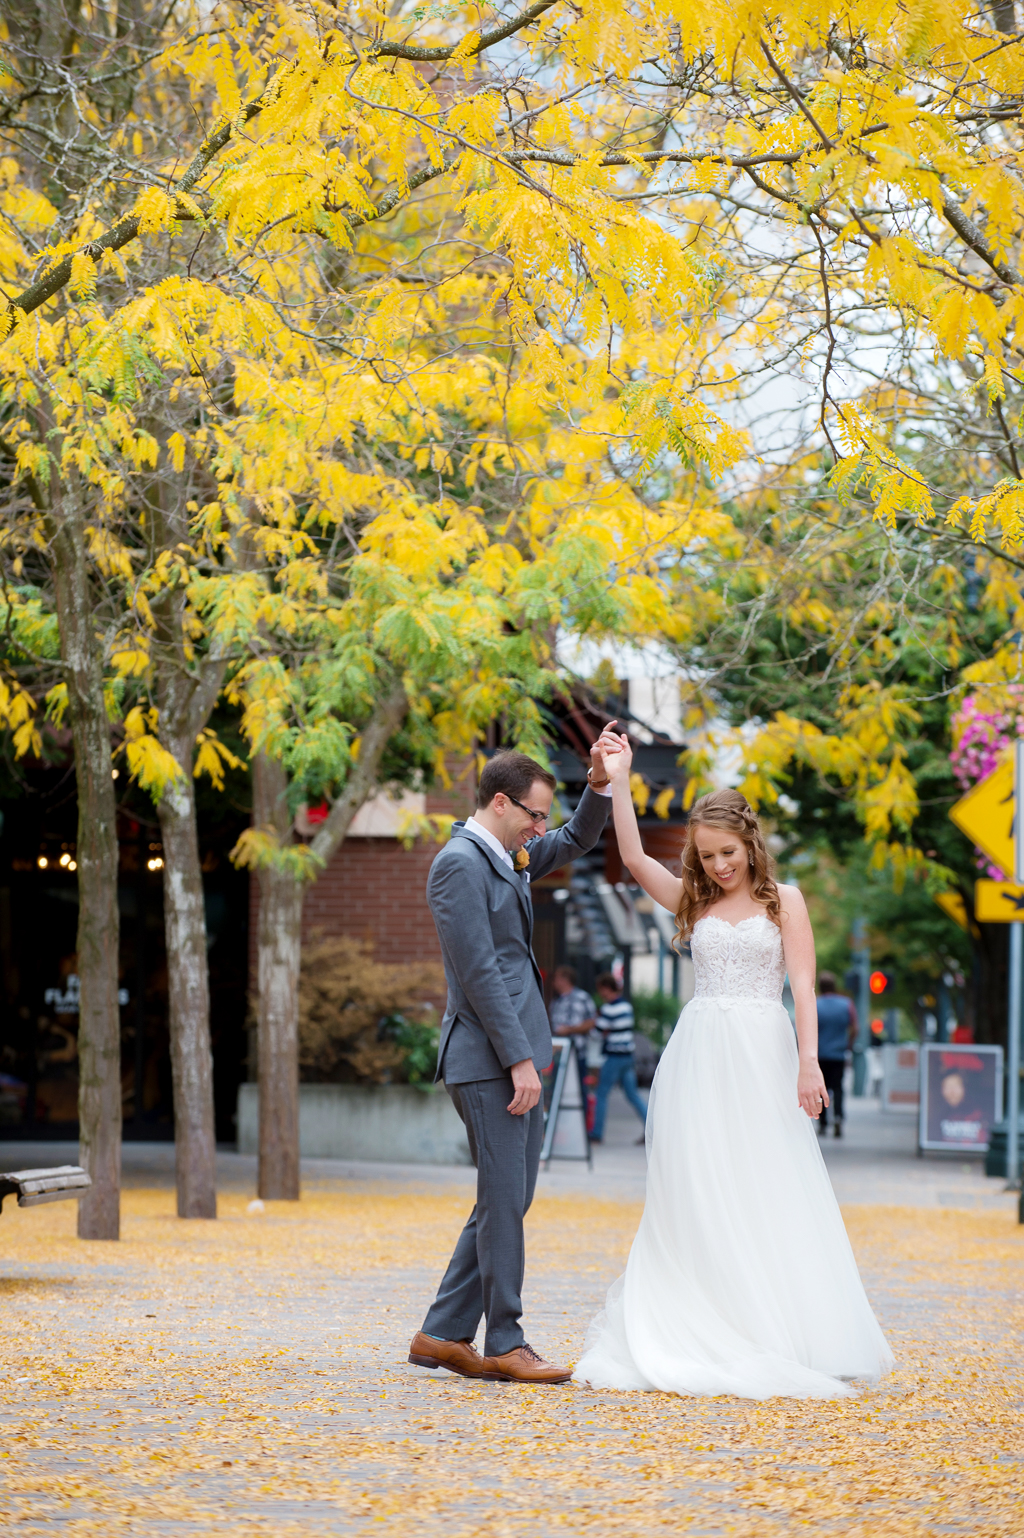 groom spins bride around in a pile of yellow leaves on the sidewalk in the pearl district